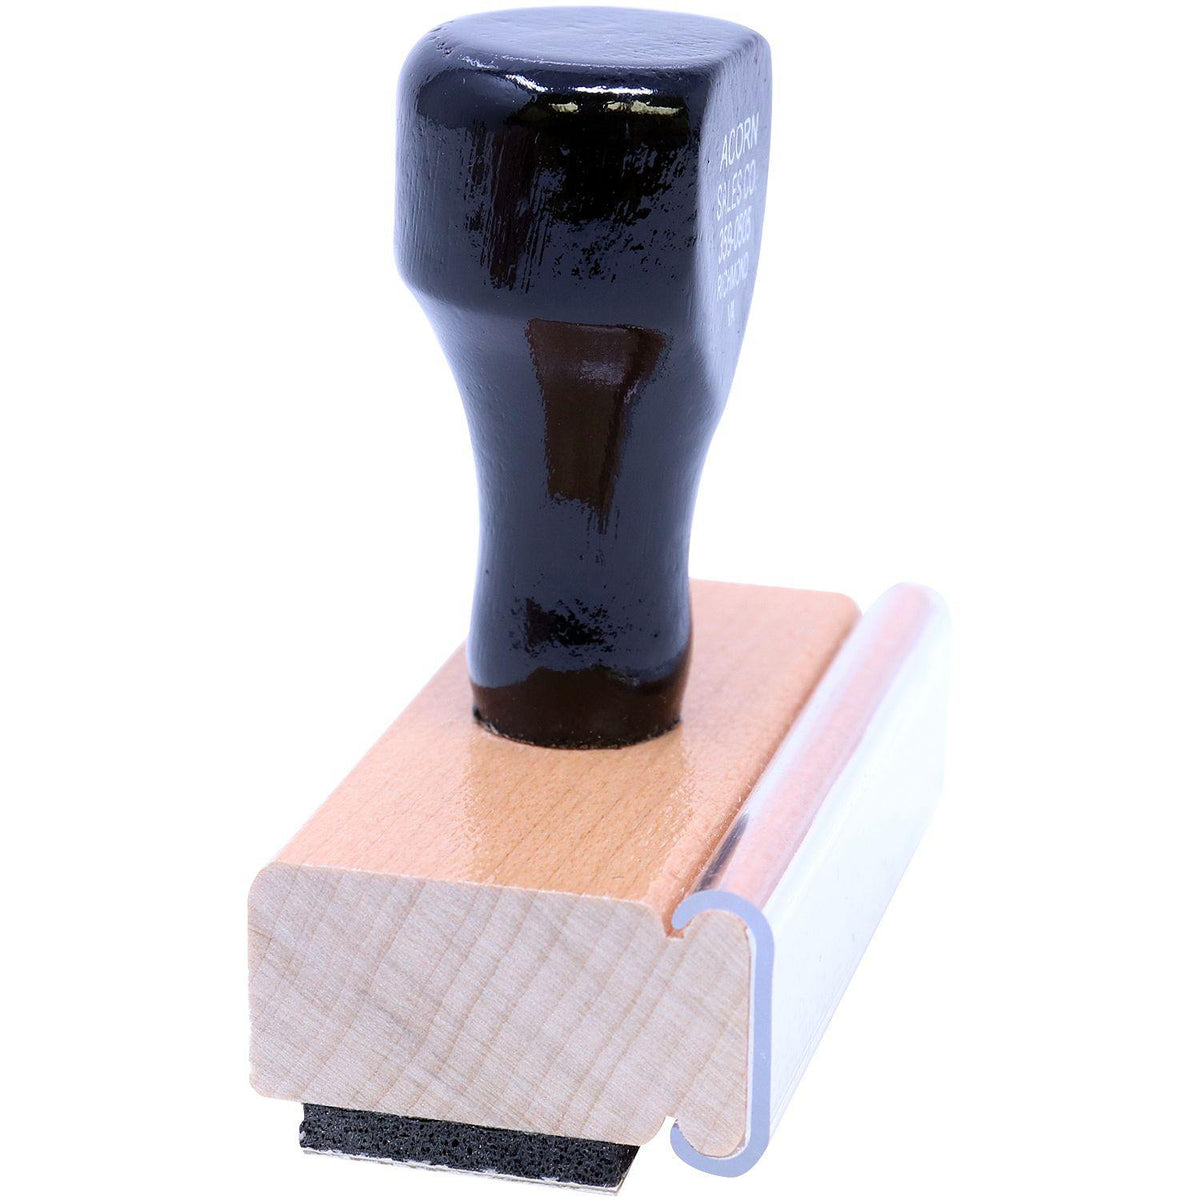 Side View of Large Devolver Copia Rubber Stamp at an Angle